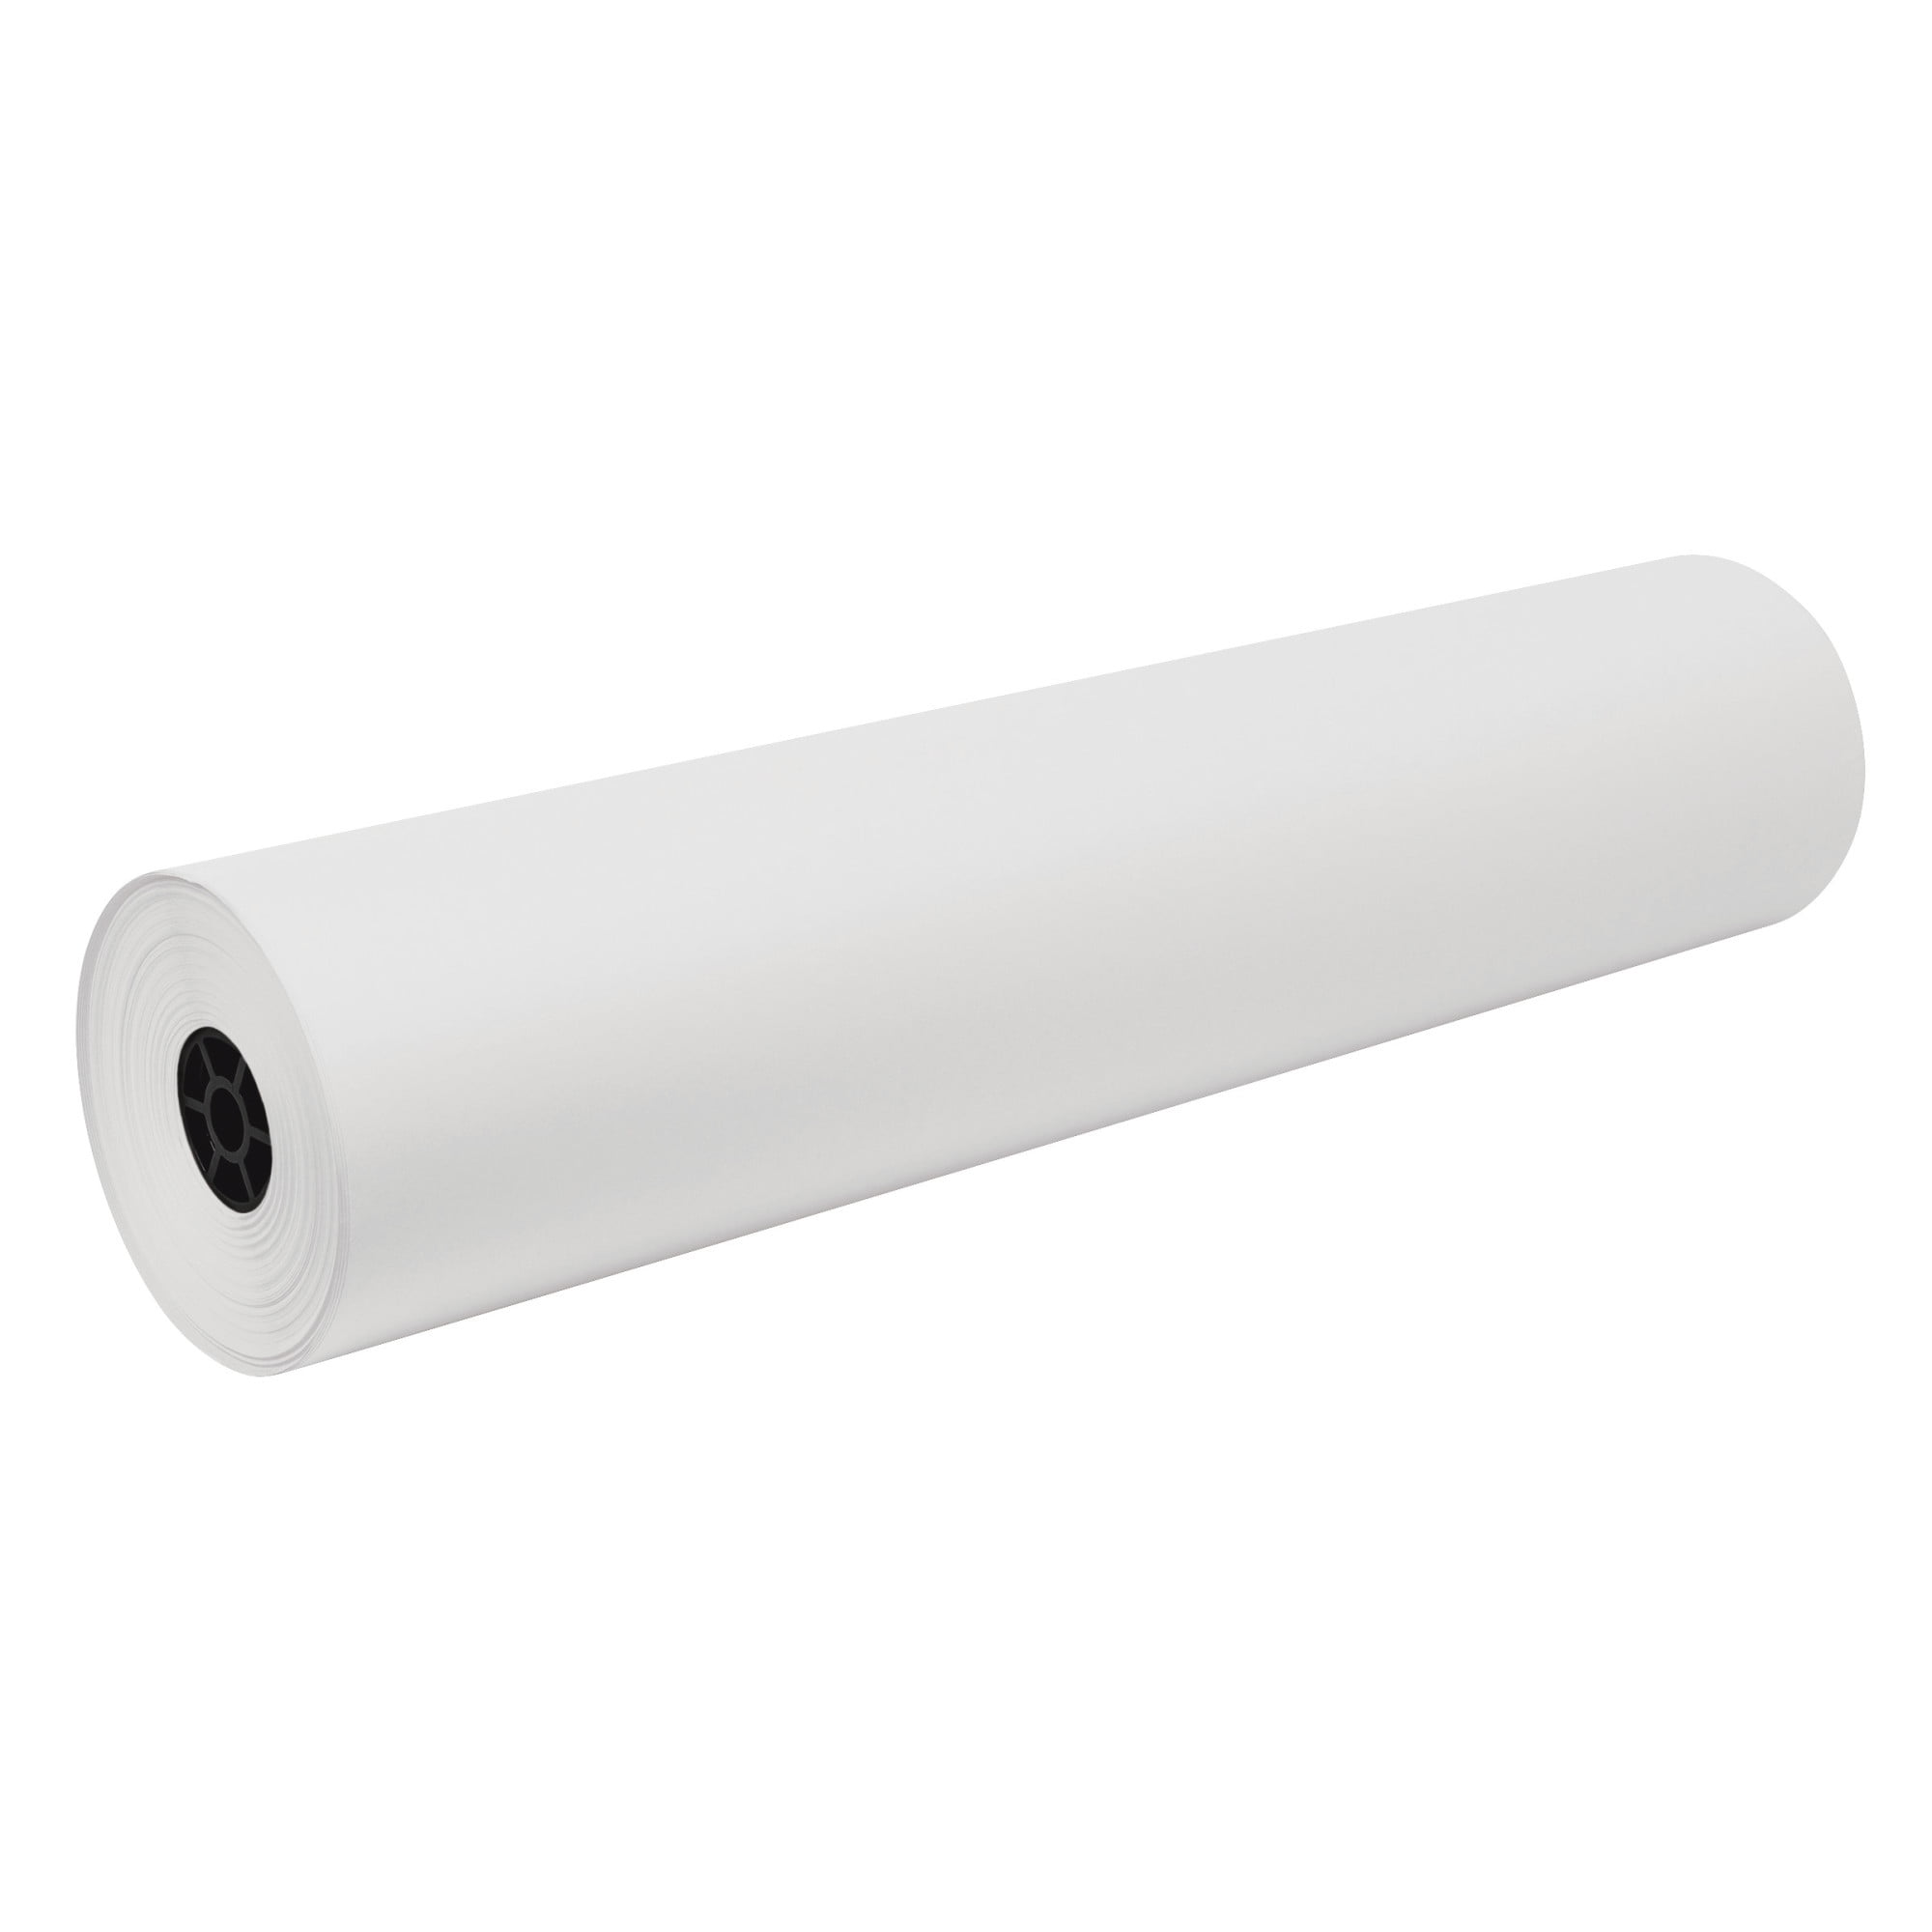 Bryco White Kraft Arts and Crafts Paper Roll - 18 inches by 100 Feet (1200  Inch) - Ideal for Paints, Wall Art, Easel Paper, Gift Wrapping Paper and  Kids Crafts 